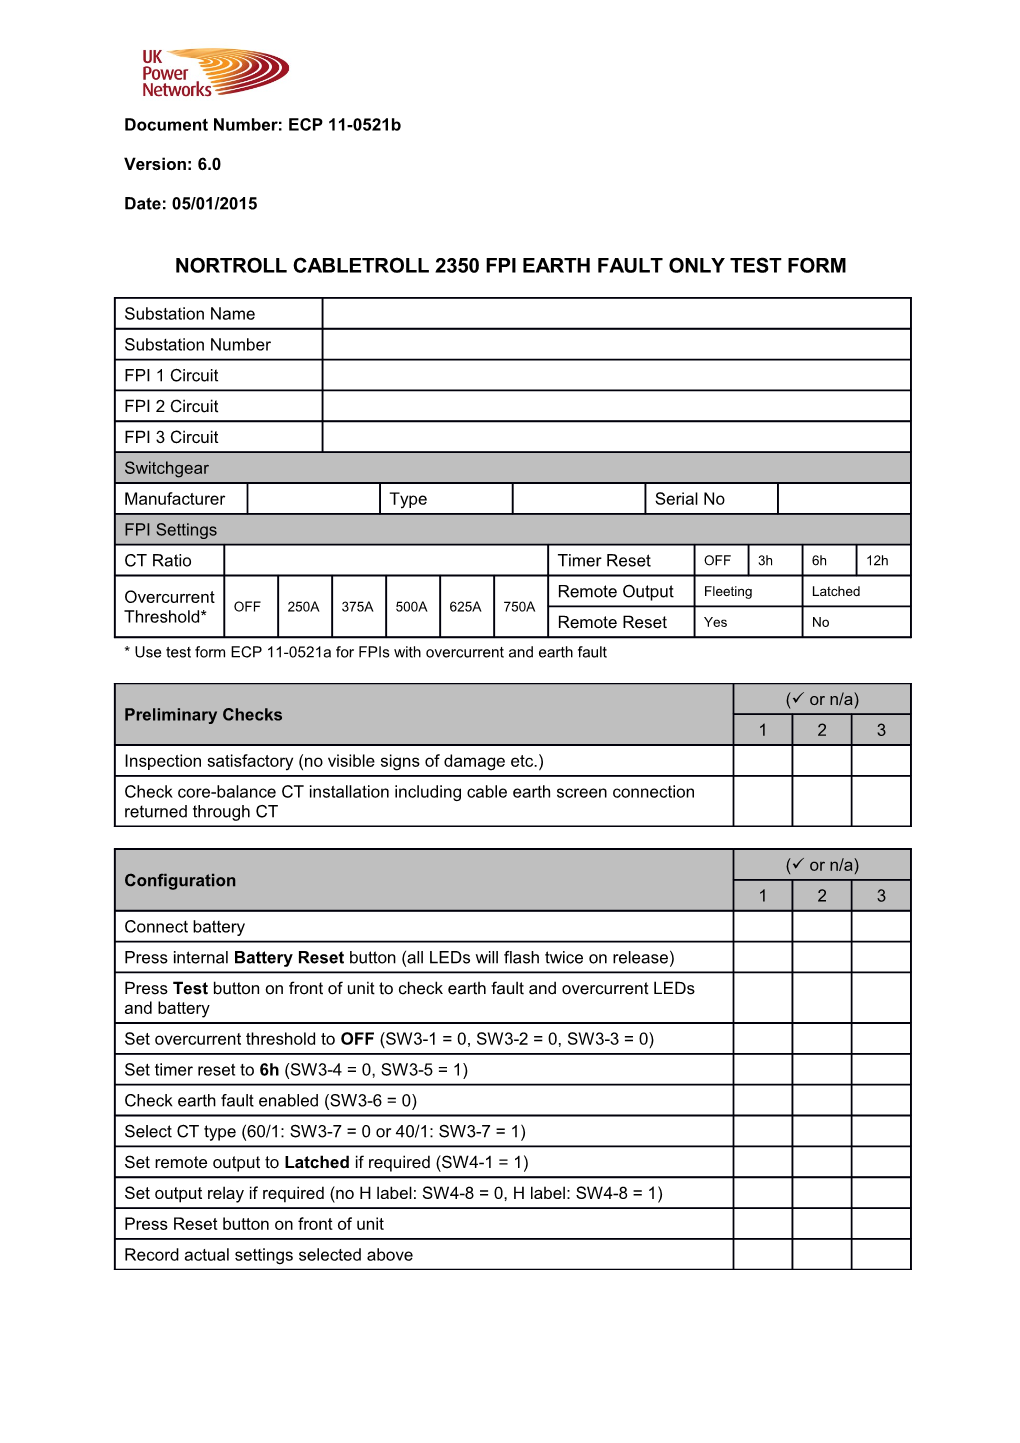 ECP 11-0521B Nortroll Cabletroll 2350 FPI Earth Fault Only Test Form